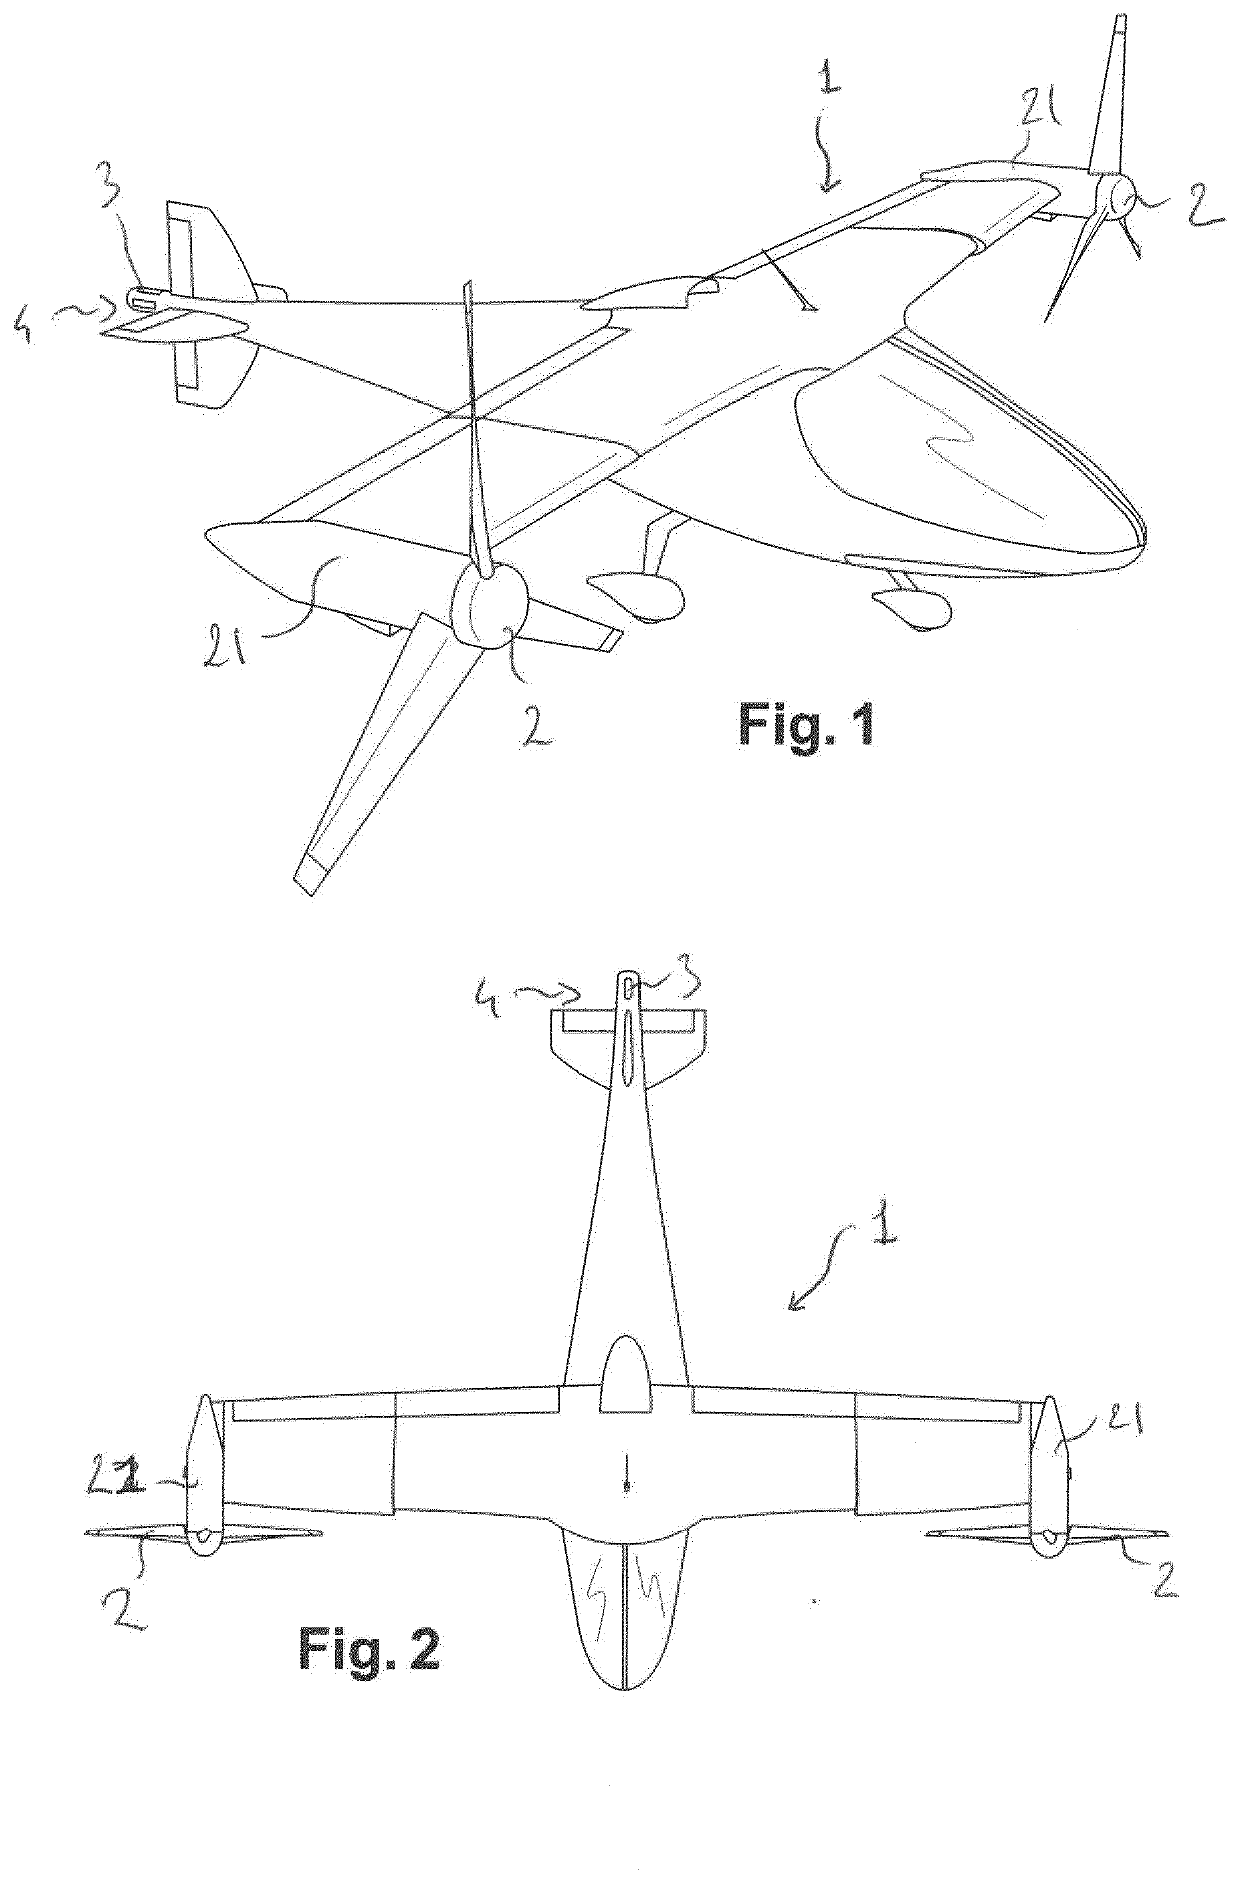 Electrical vertical take-off and landing aircraft